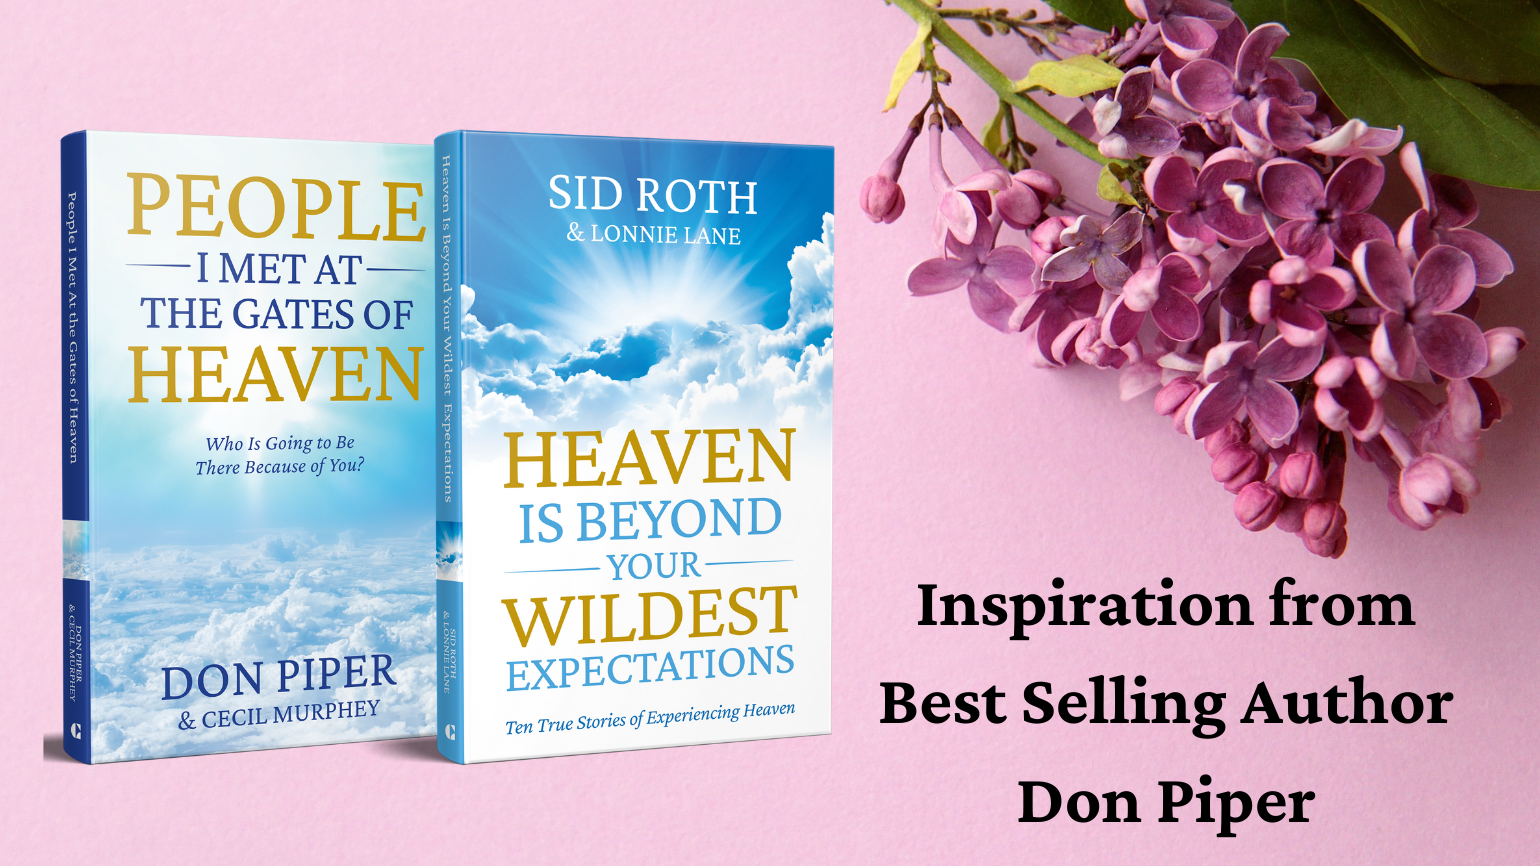 People I Met at the Gates of Heaven set (Guideposts) spiritual faith based mothers day gifts